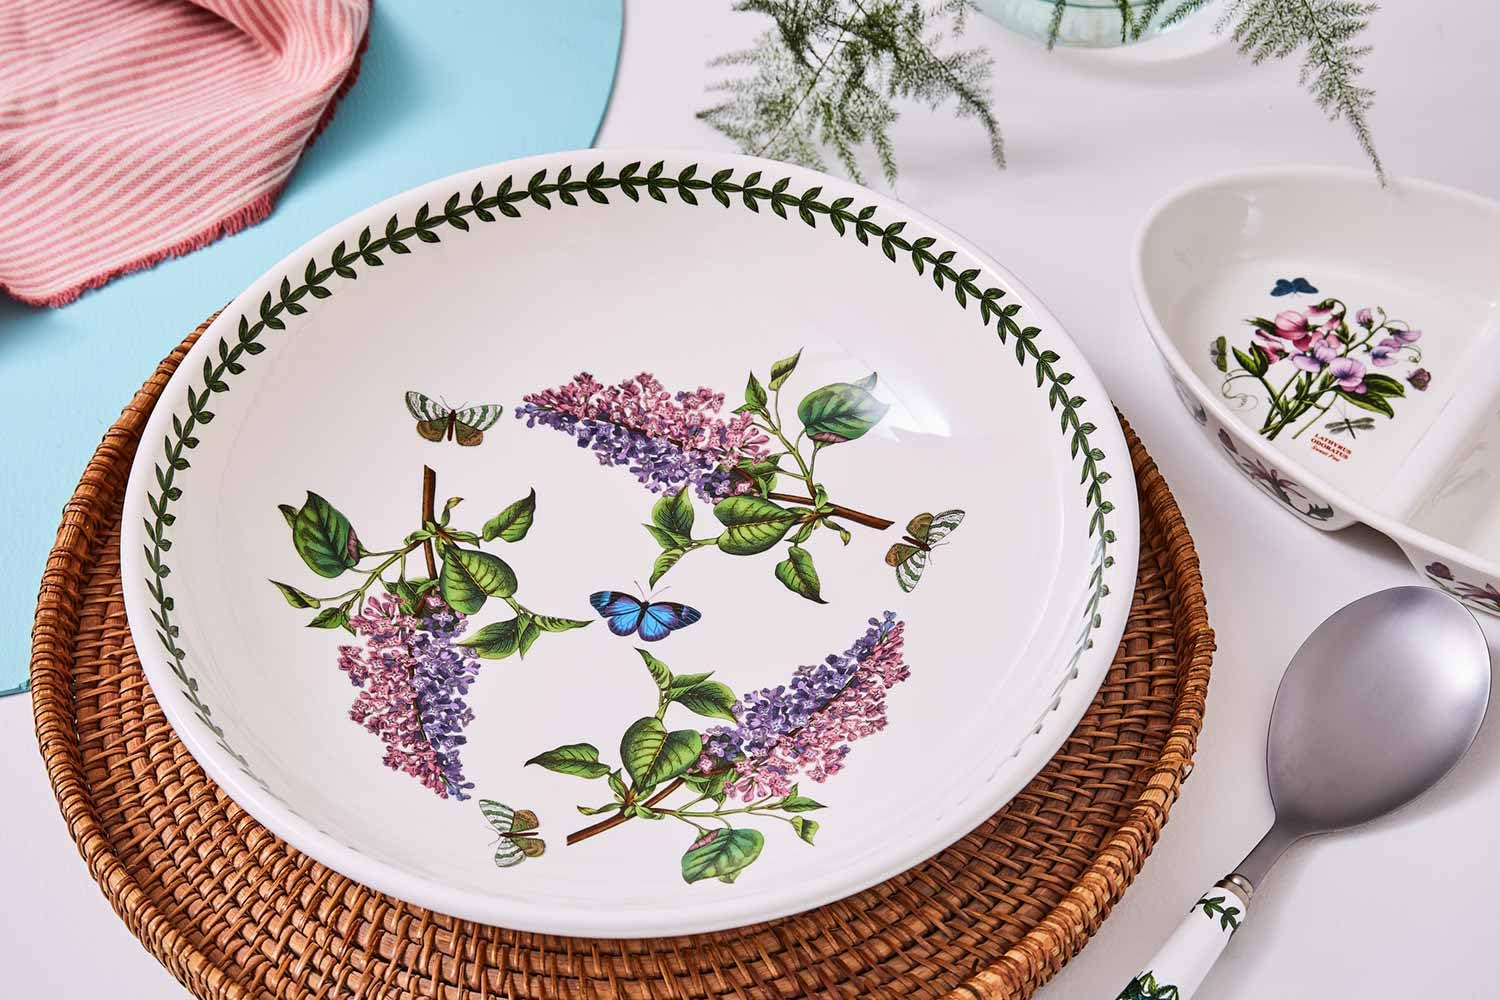 Portmeirion Botanic Garden Low Fruit Bowl | 13 Inch Pasta Bowl with Lilac Motif | Made in England from Fine Earthenware | Microwave and Dishwasher Safe